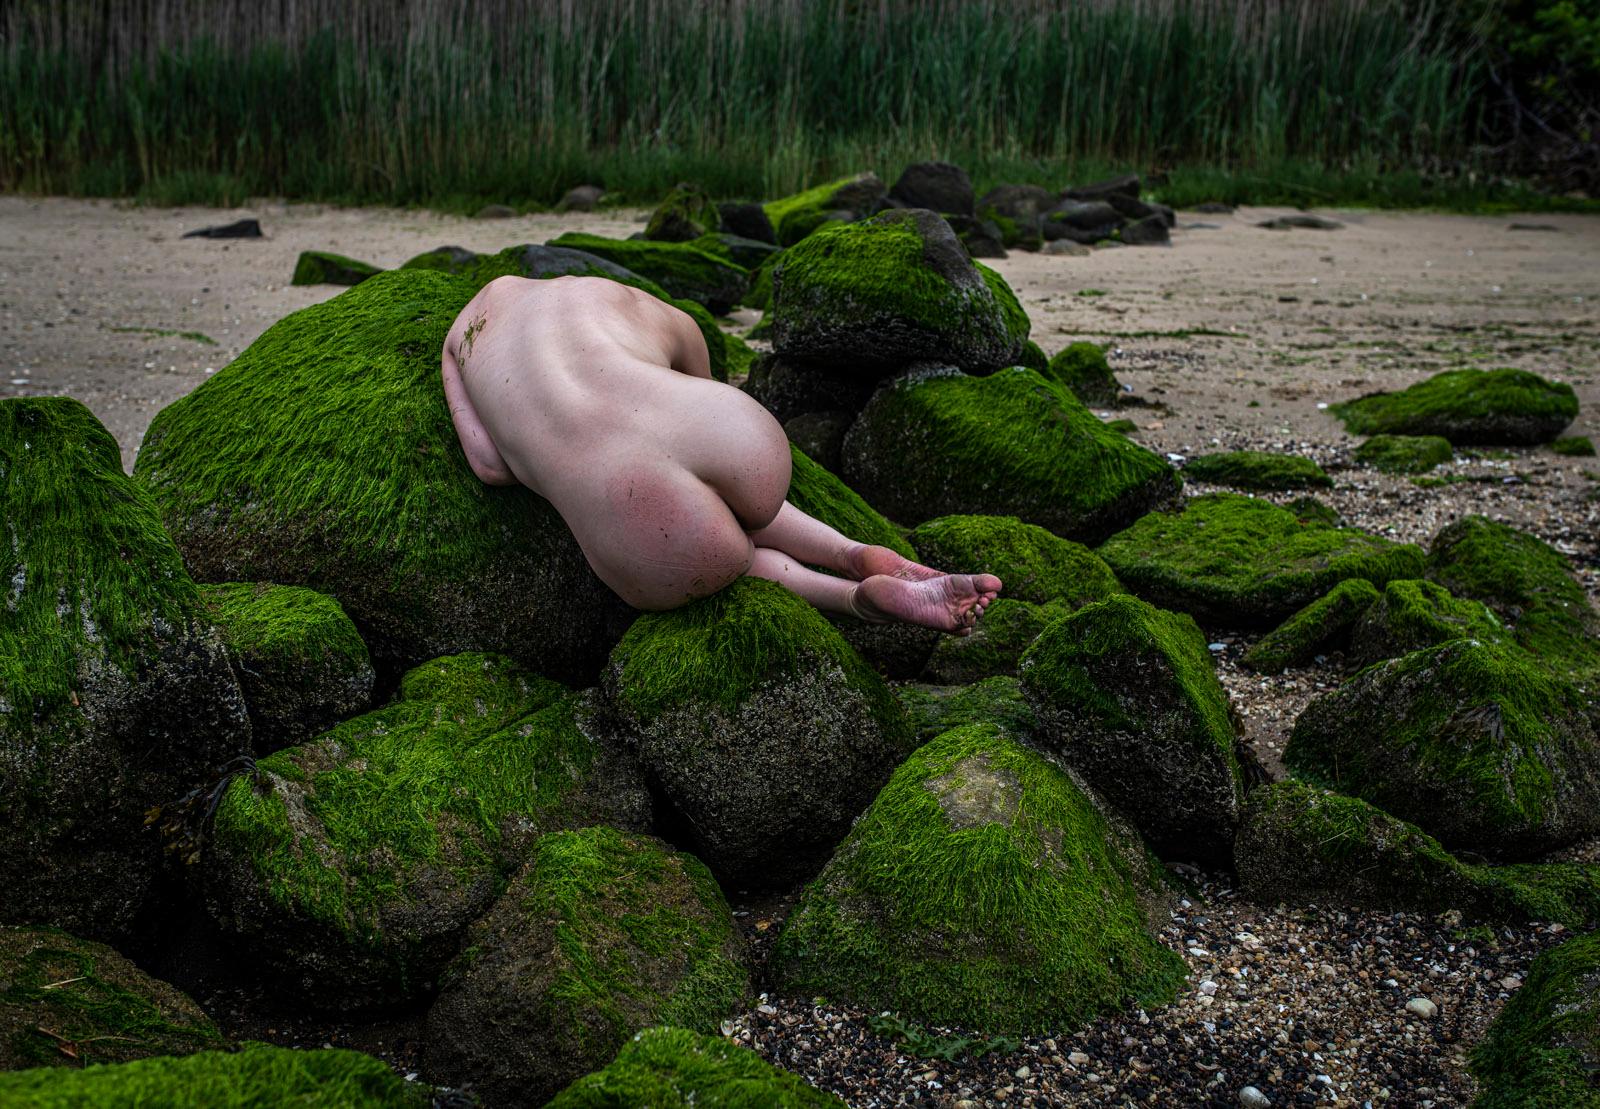 "Body Rocks 1, Color"- Moody Nude Photo Shot in the Rain on a Beach